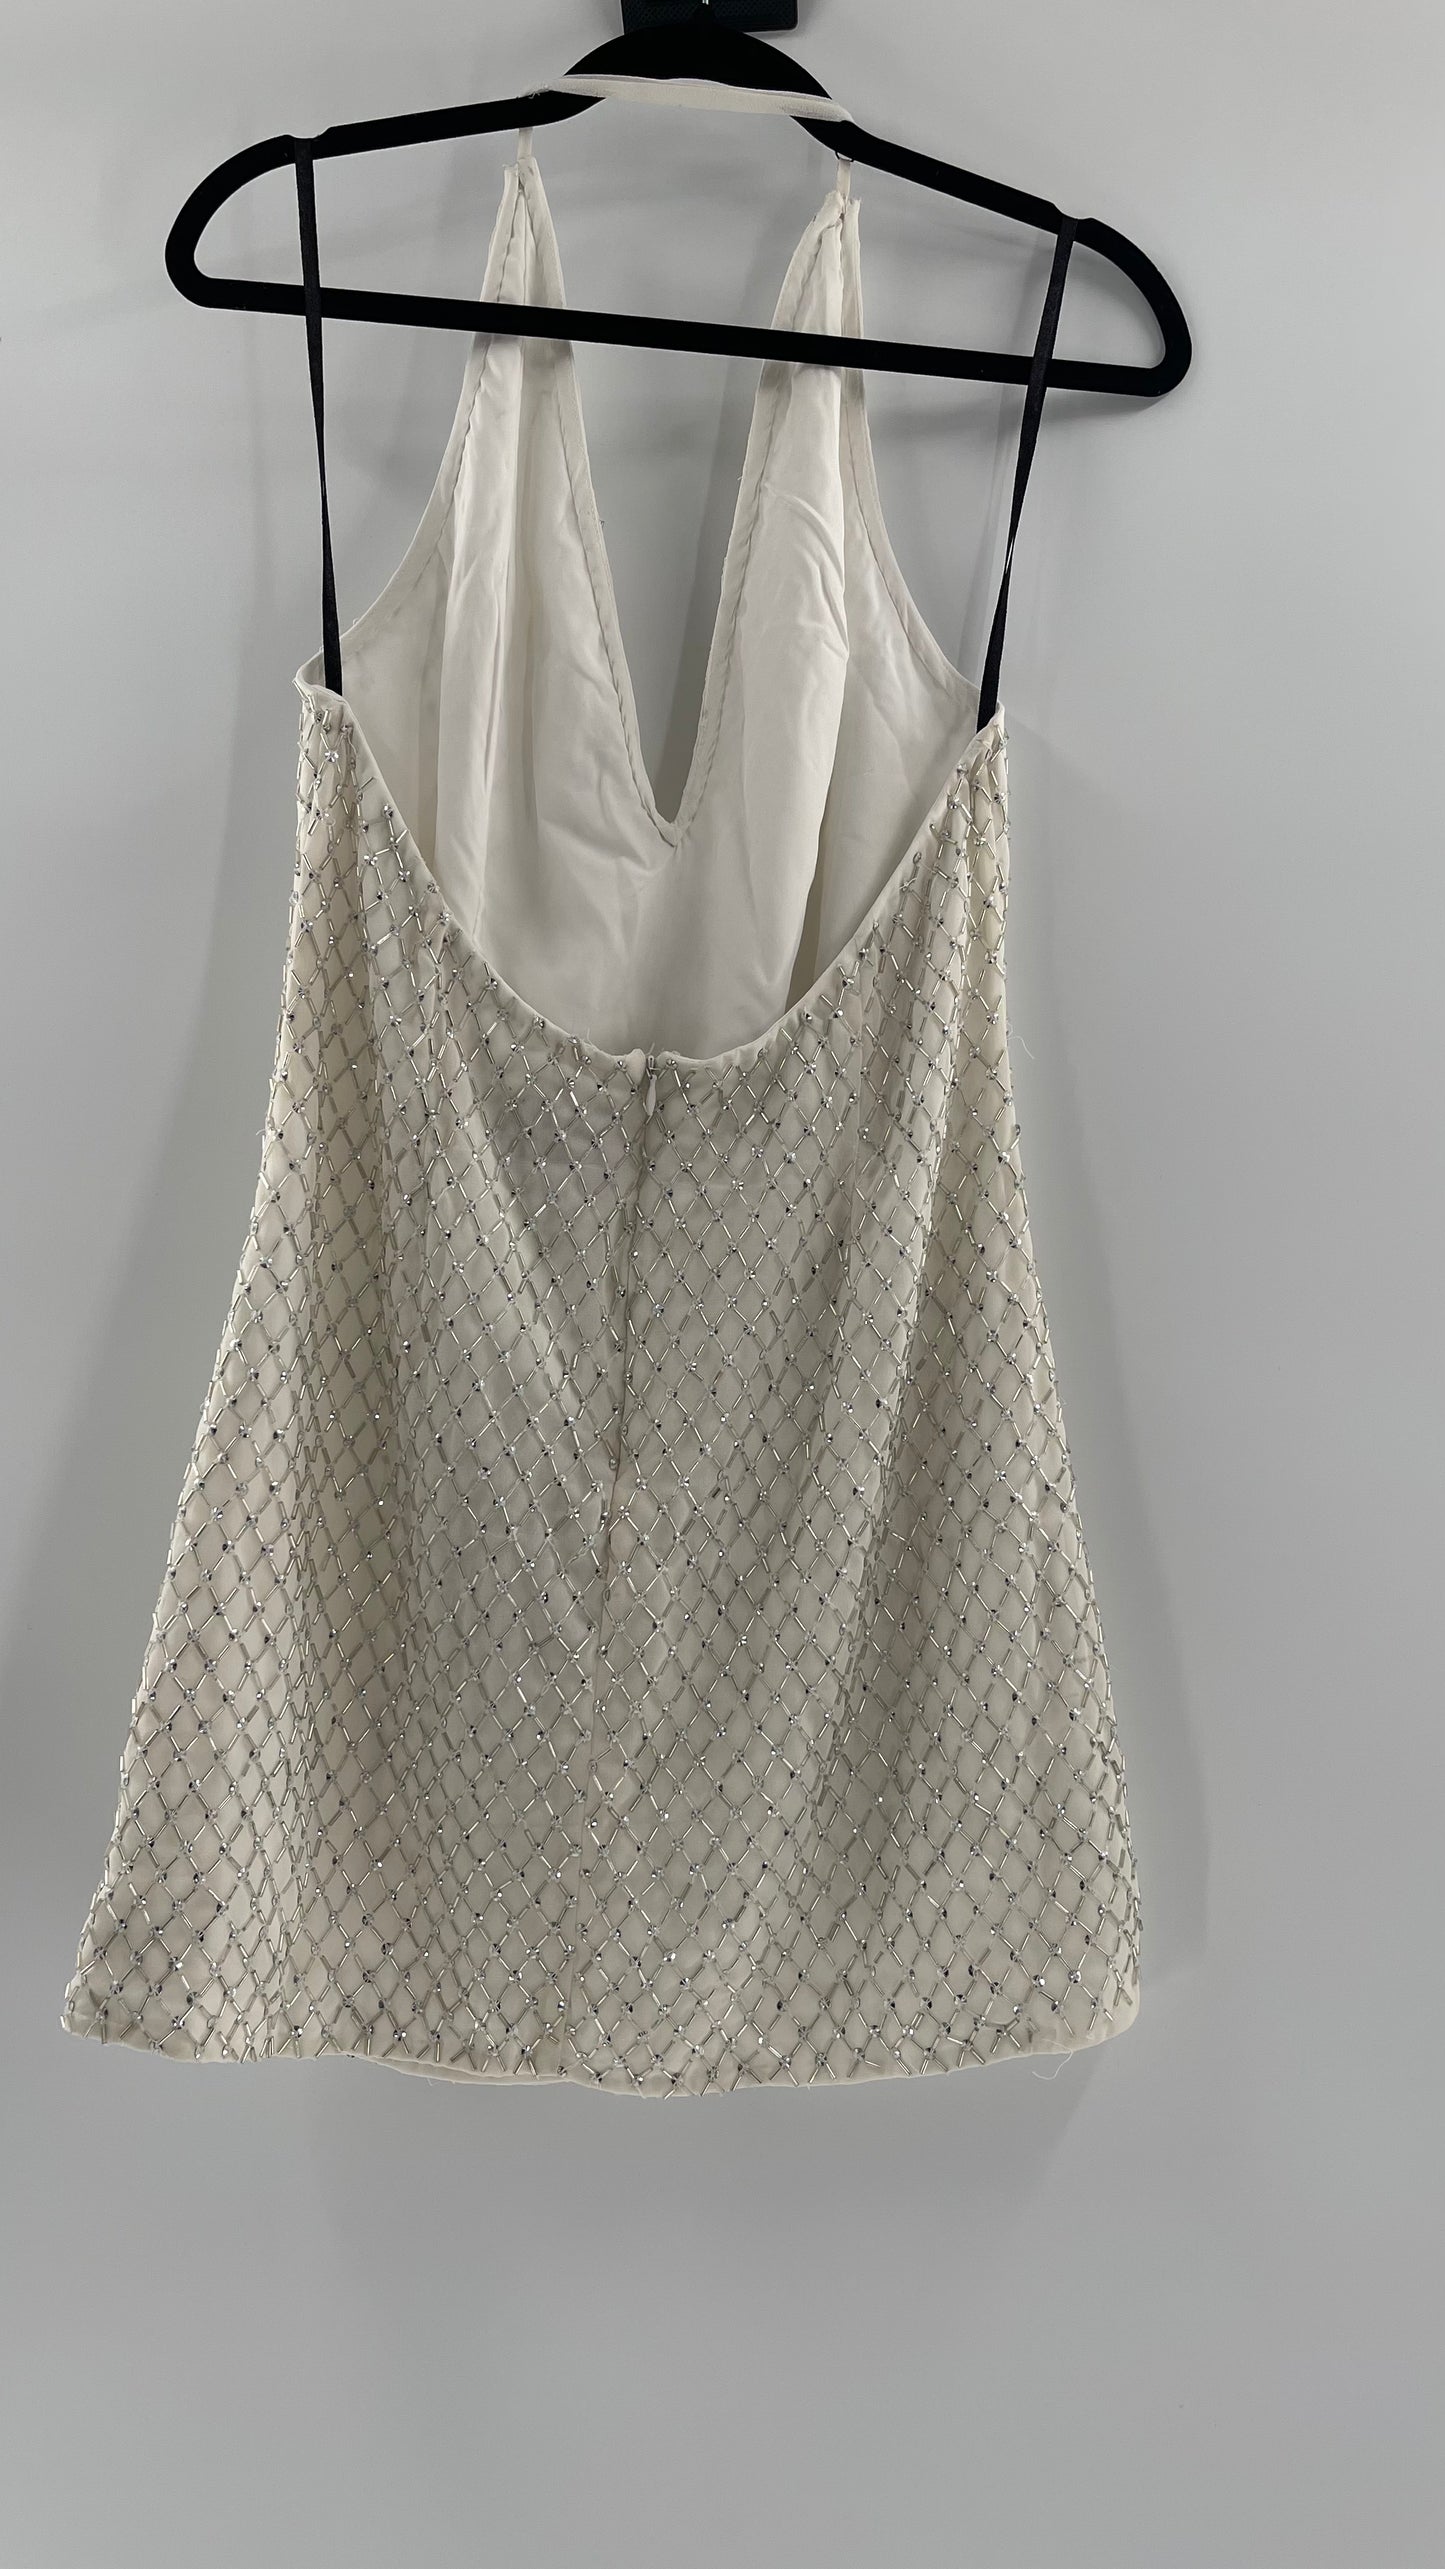 X by NBD White Jack Dress in Ivory Silver Beaded Halter Dress with Tags Attached (Large)